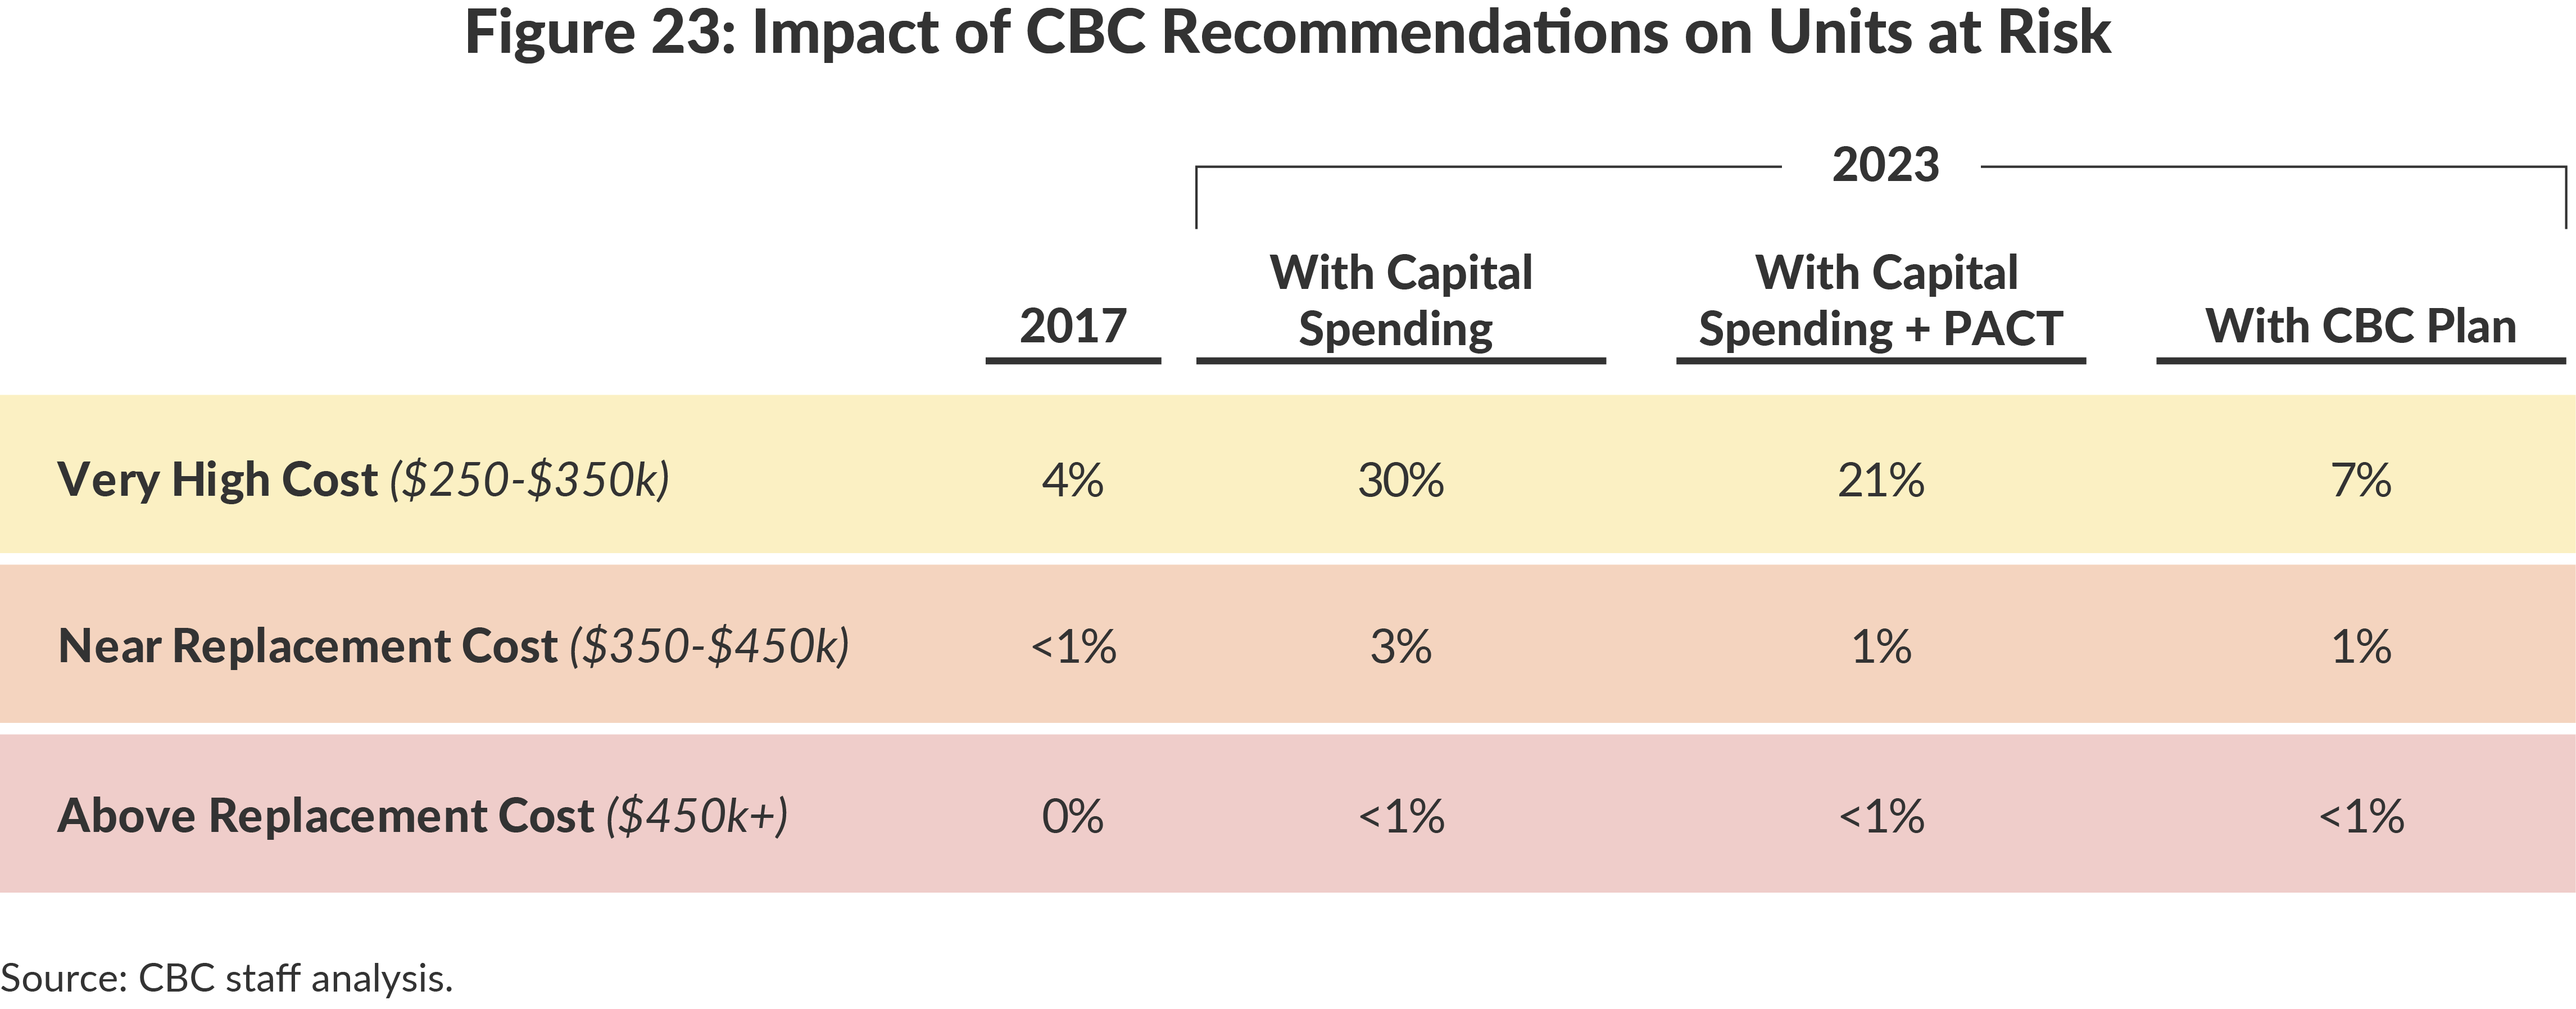 Figure 23: Impact of CBC Recommendations on Units at Risk